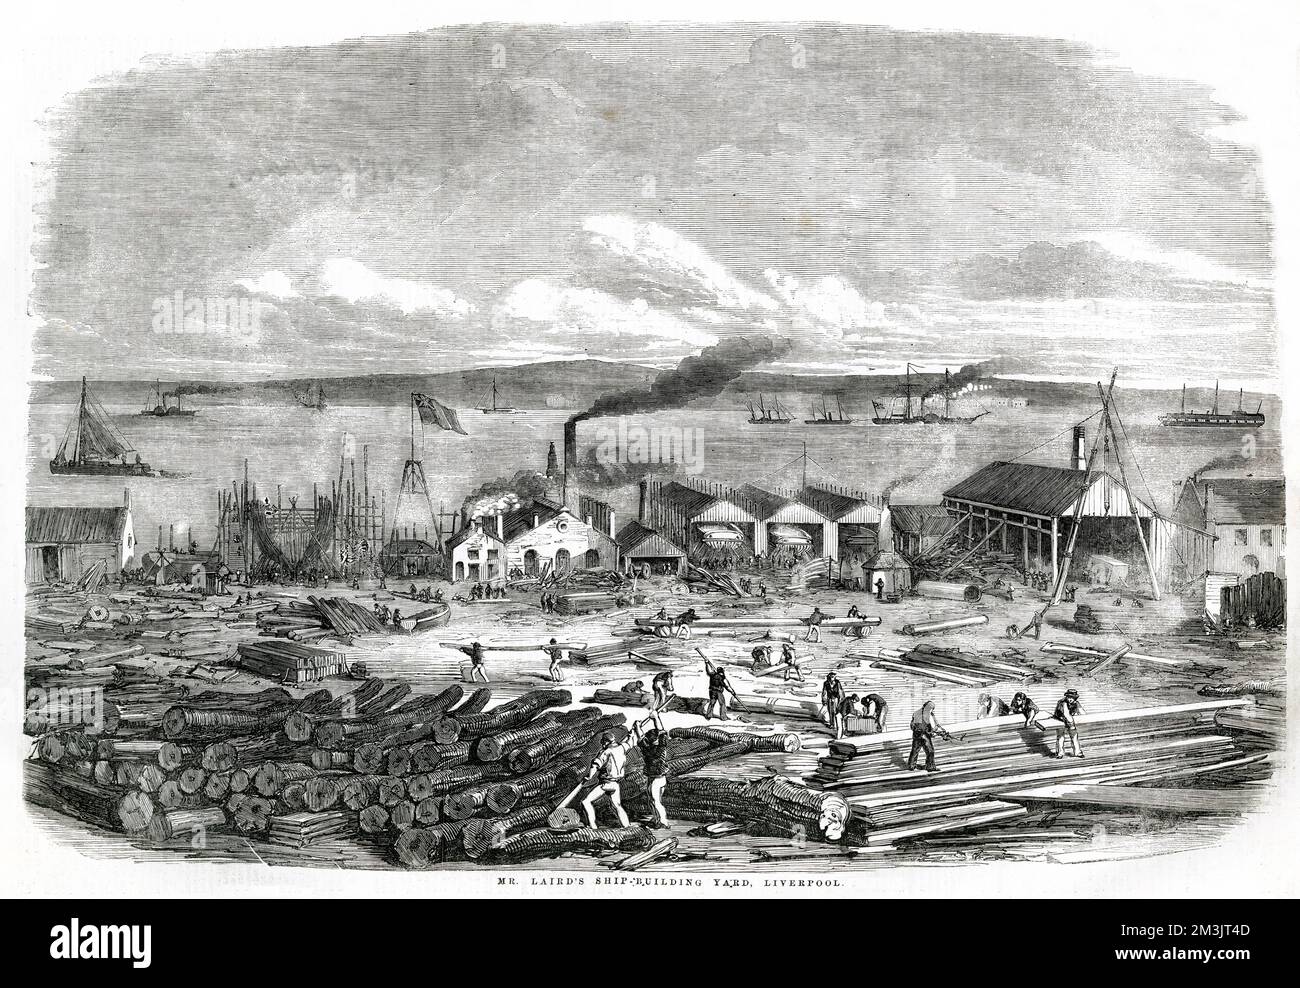 Mr. Laird's ship-building yard in Liverpool. Iron ship-building on an extensive scale originated from this prolific ship-yard, with vessels carrying heavy guns for the East India Company constructed at Laird's. 75 ships were built between January and October 1856, when this drawing was made.     Date: 1856 Stock Photo